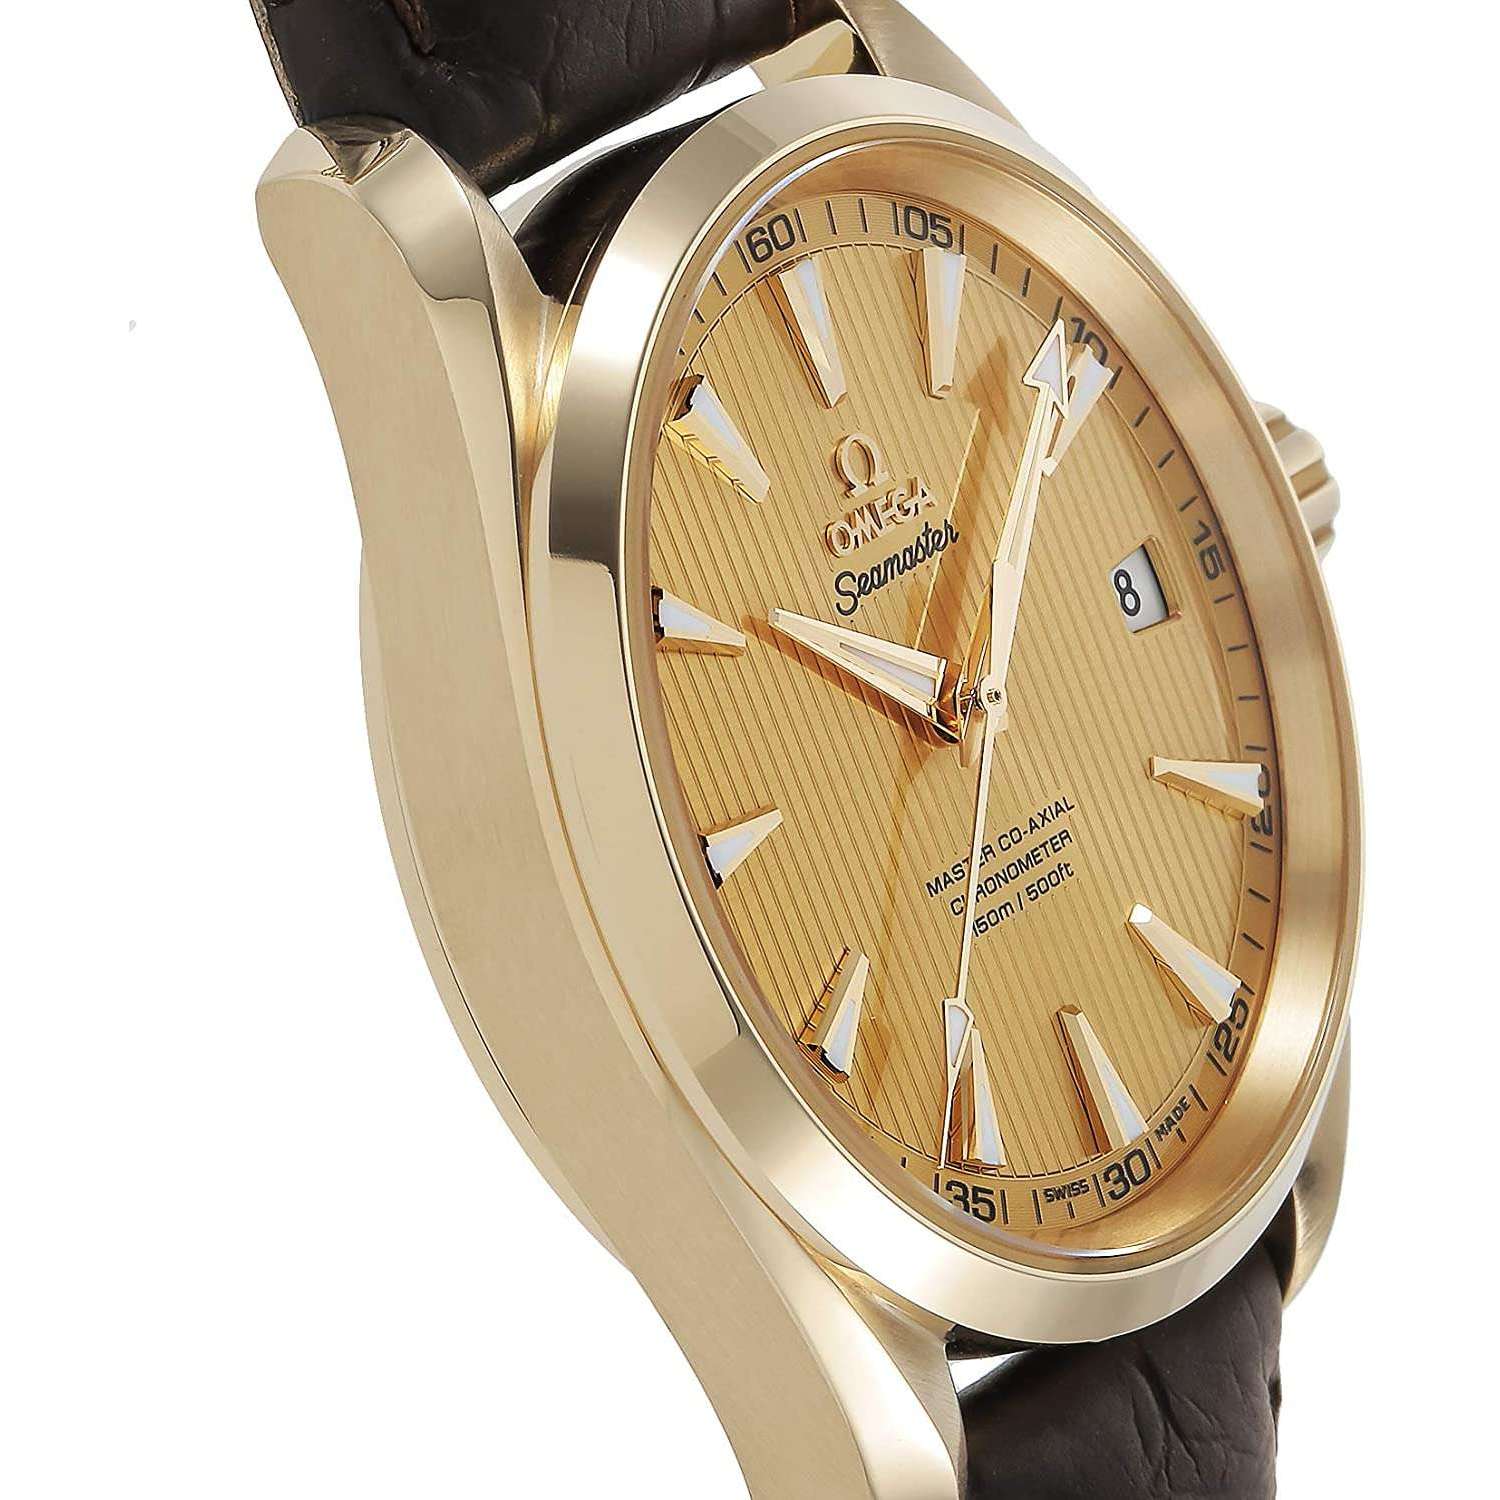 ROOK JAPAN:OMEGA SEAMASTER MASTER CO-AXIAL CHRONOMETER 42 MM MEN WATCH 231.53.42.21.08.001,Luxury Watch,Omega